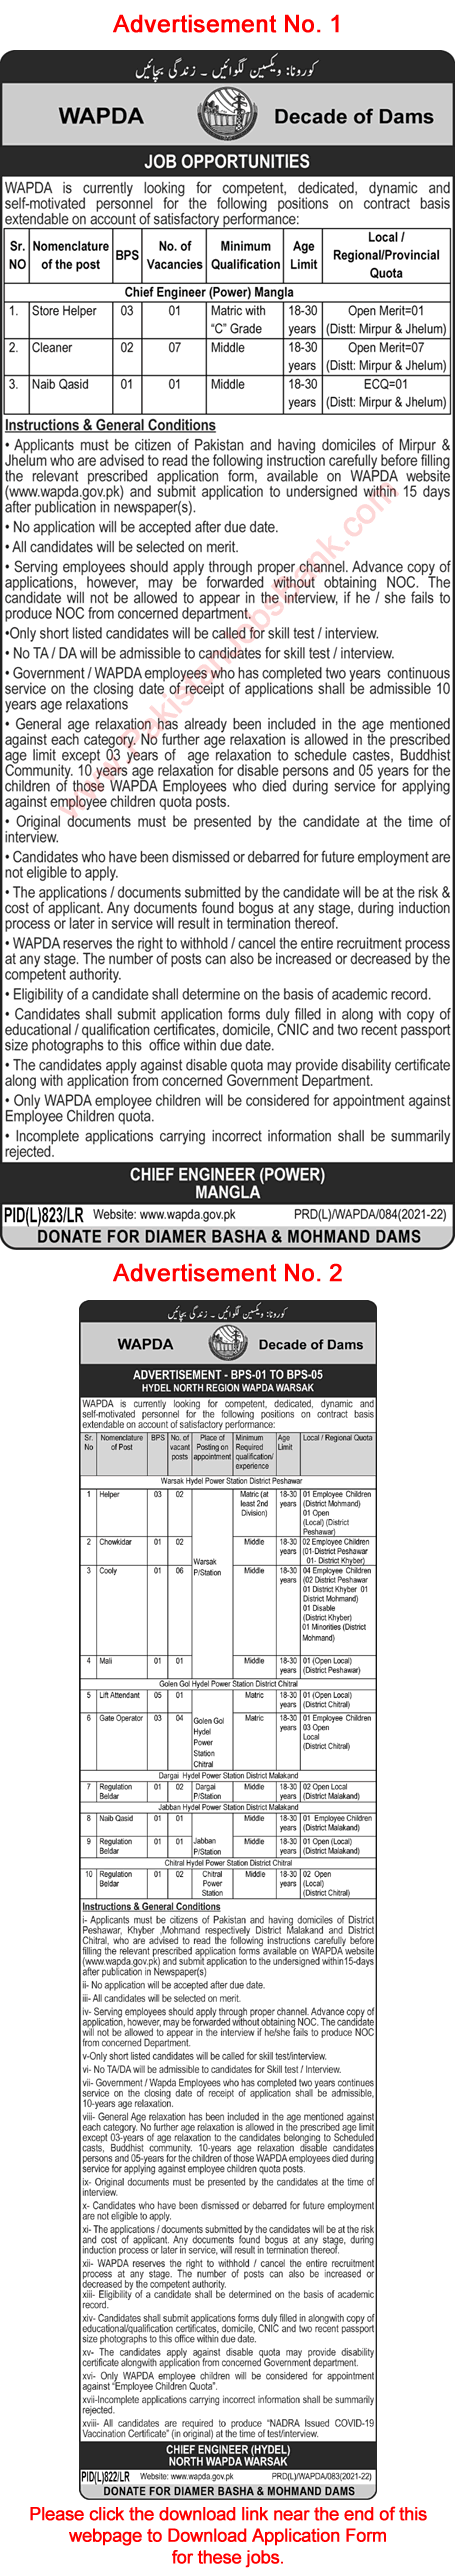 WAPDA Jobs September 2021 Application Form Cleaners, Coolie, Gate Operators & Others Latest